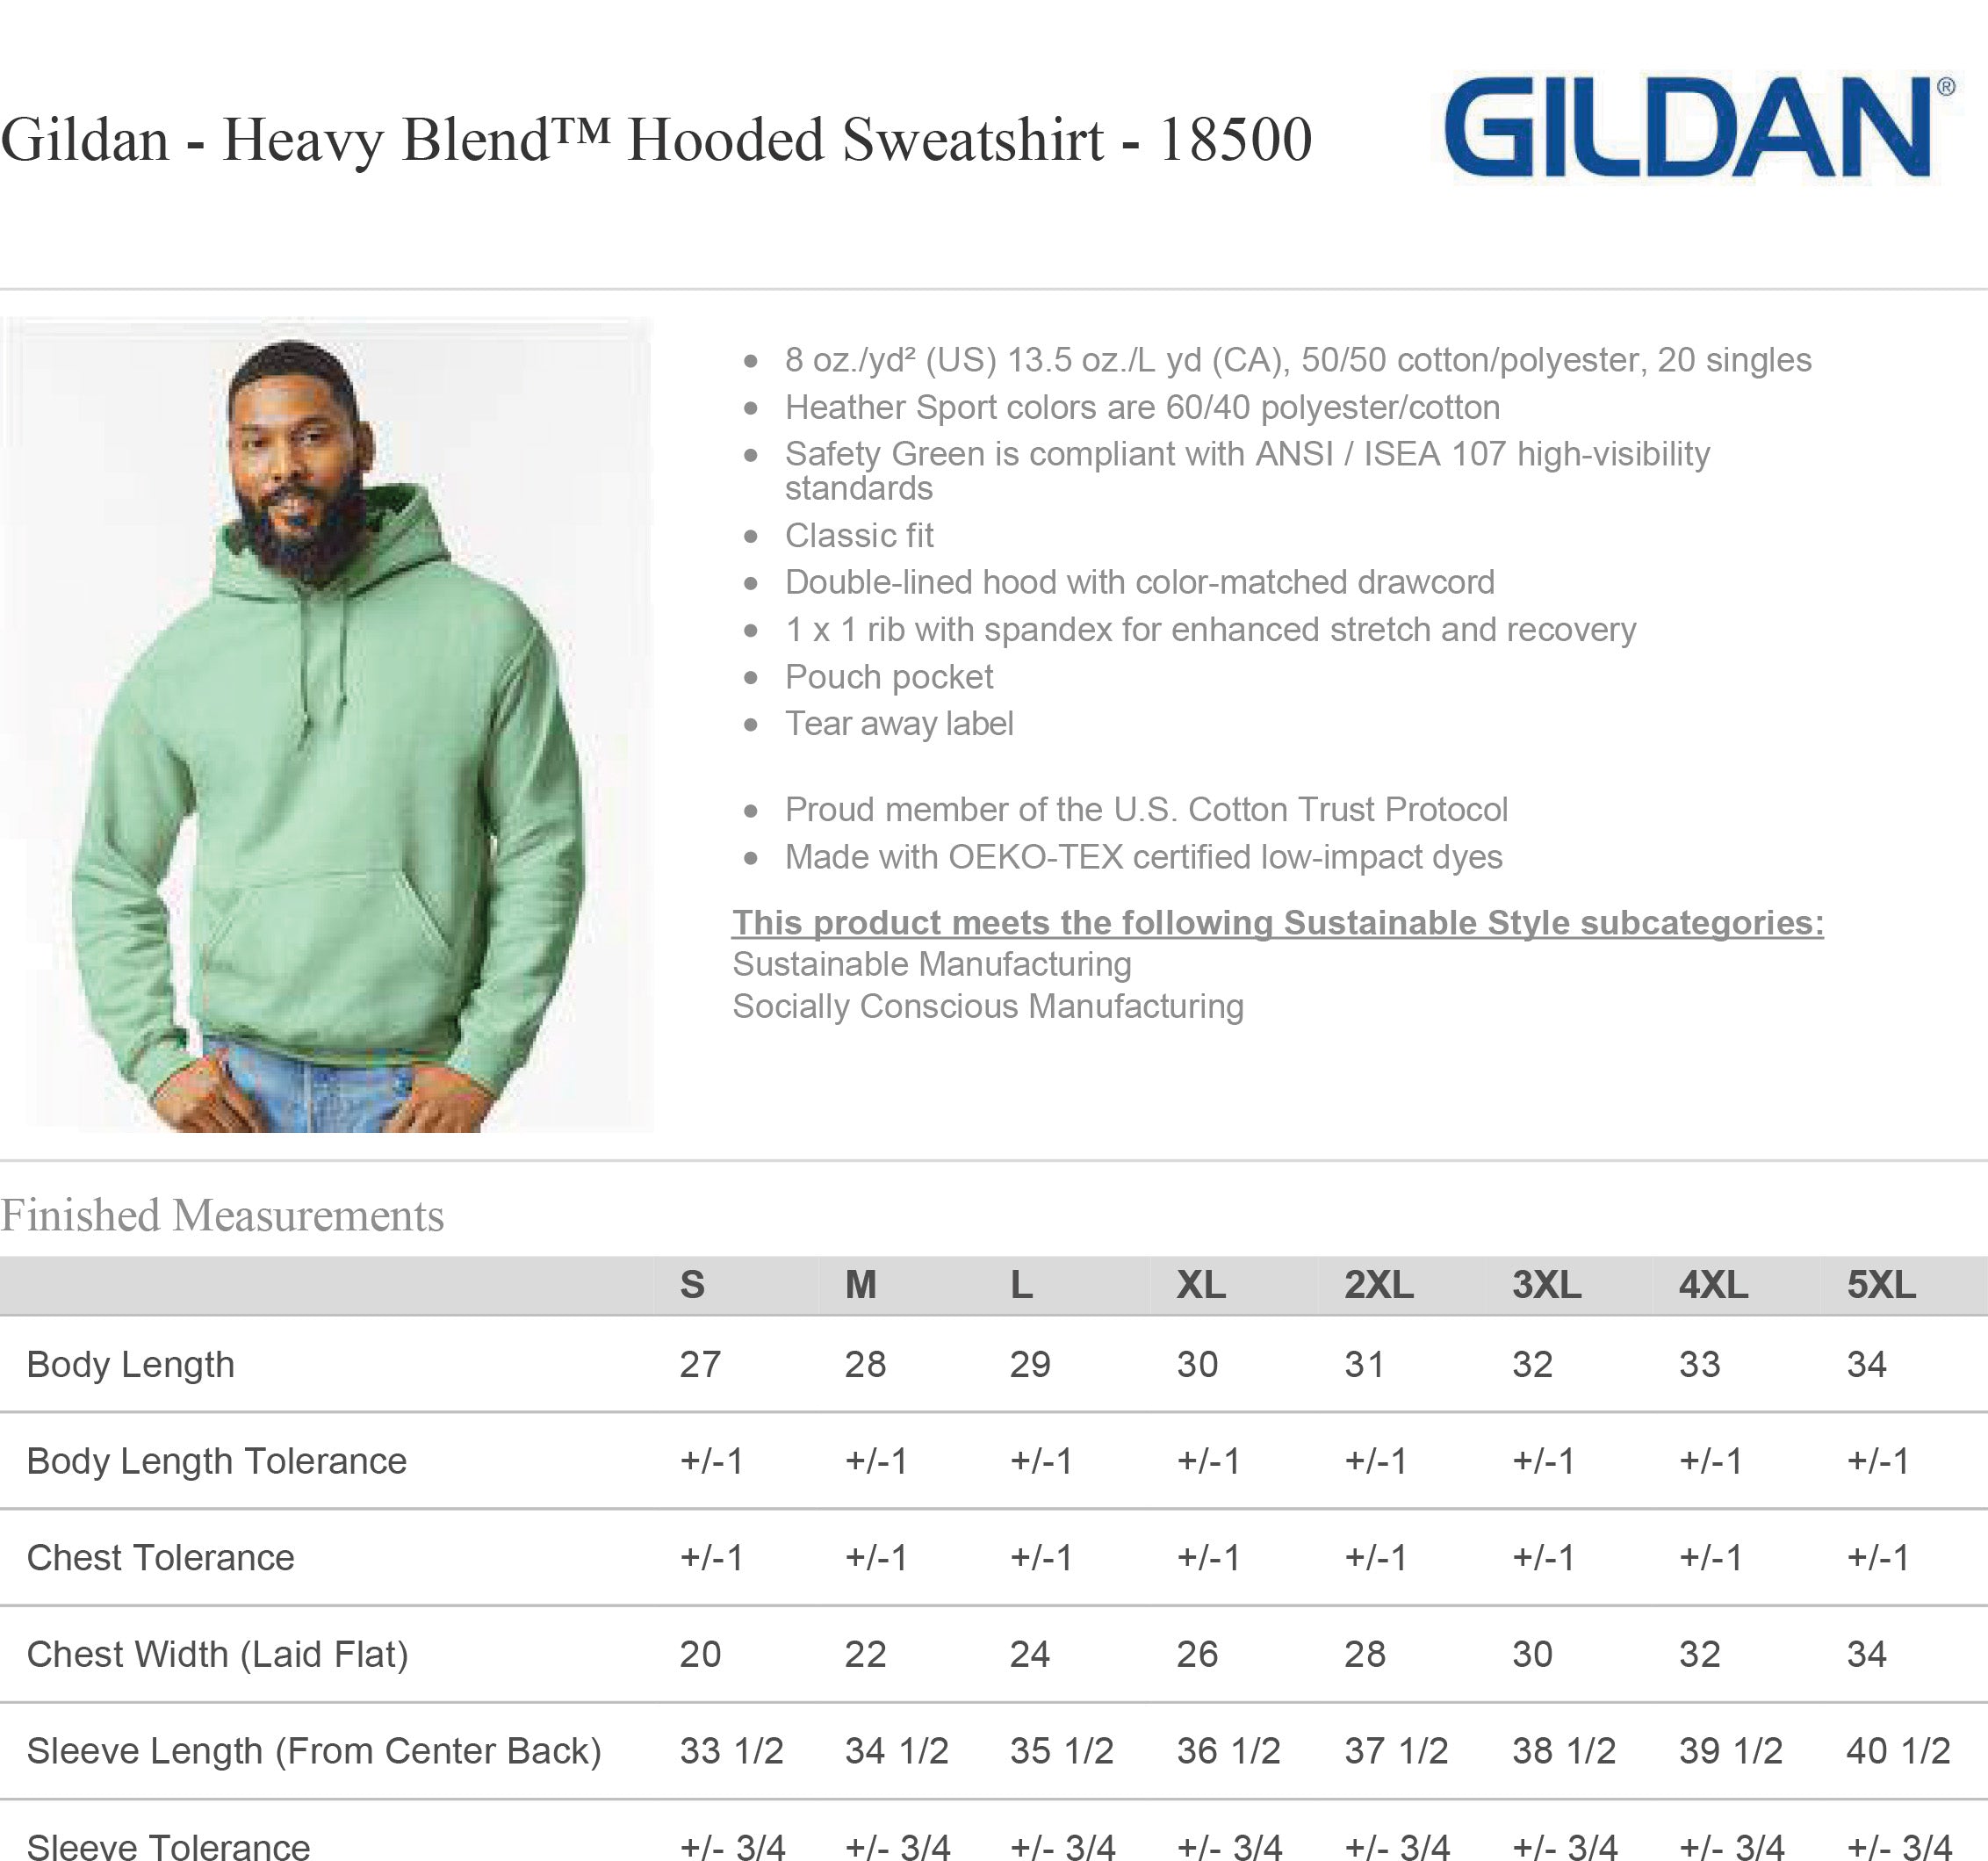 Heavy Blend Hoodie Sizing Chart and Specs (18500)